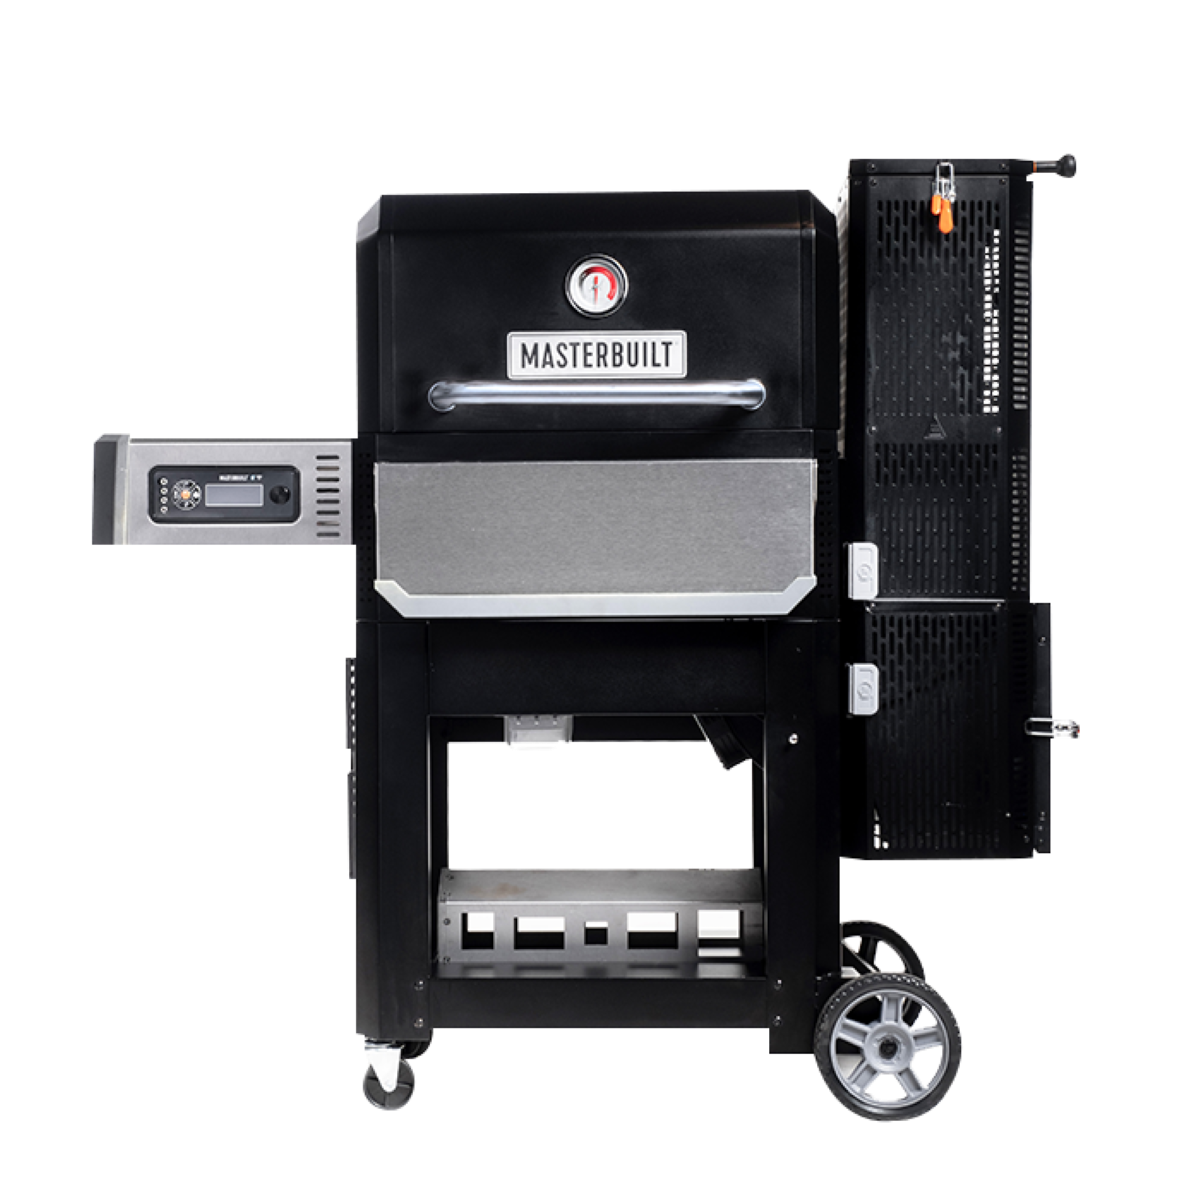 We’ve mastered the taste of charcoal made simple. Experience smoking, grilling, and so much more.